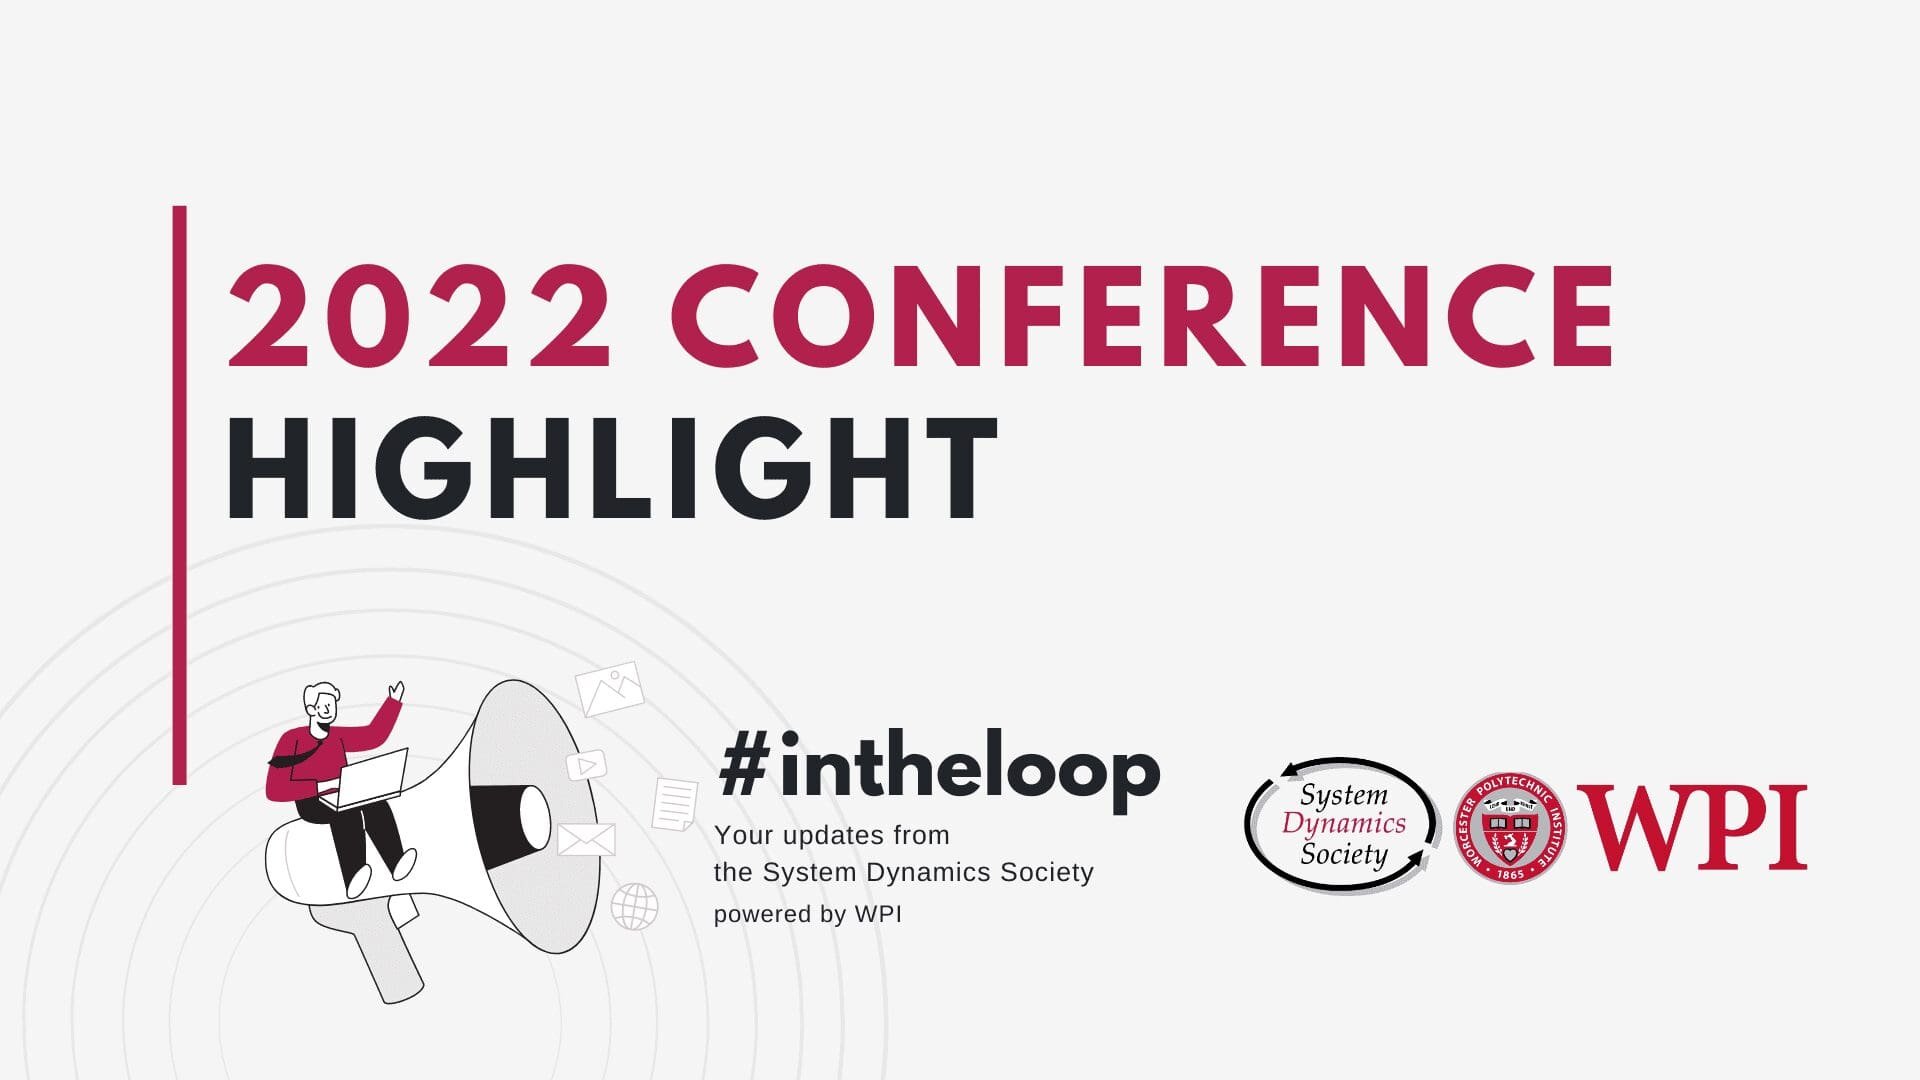 2022 Conference Highlight #intheloop